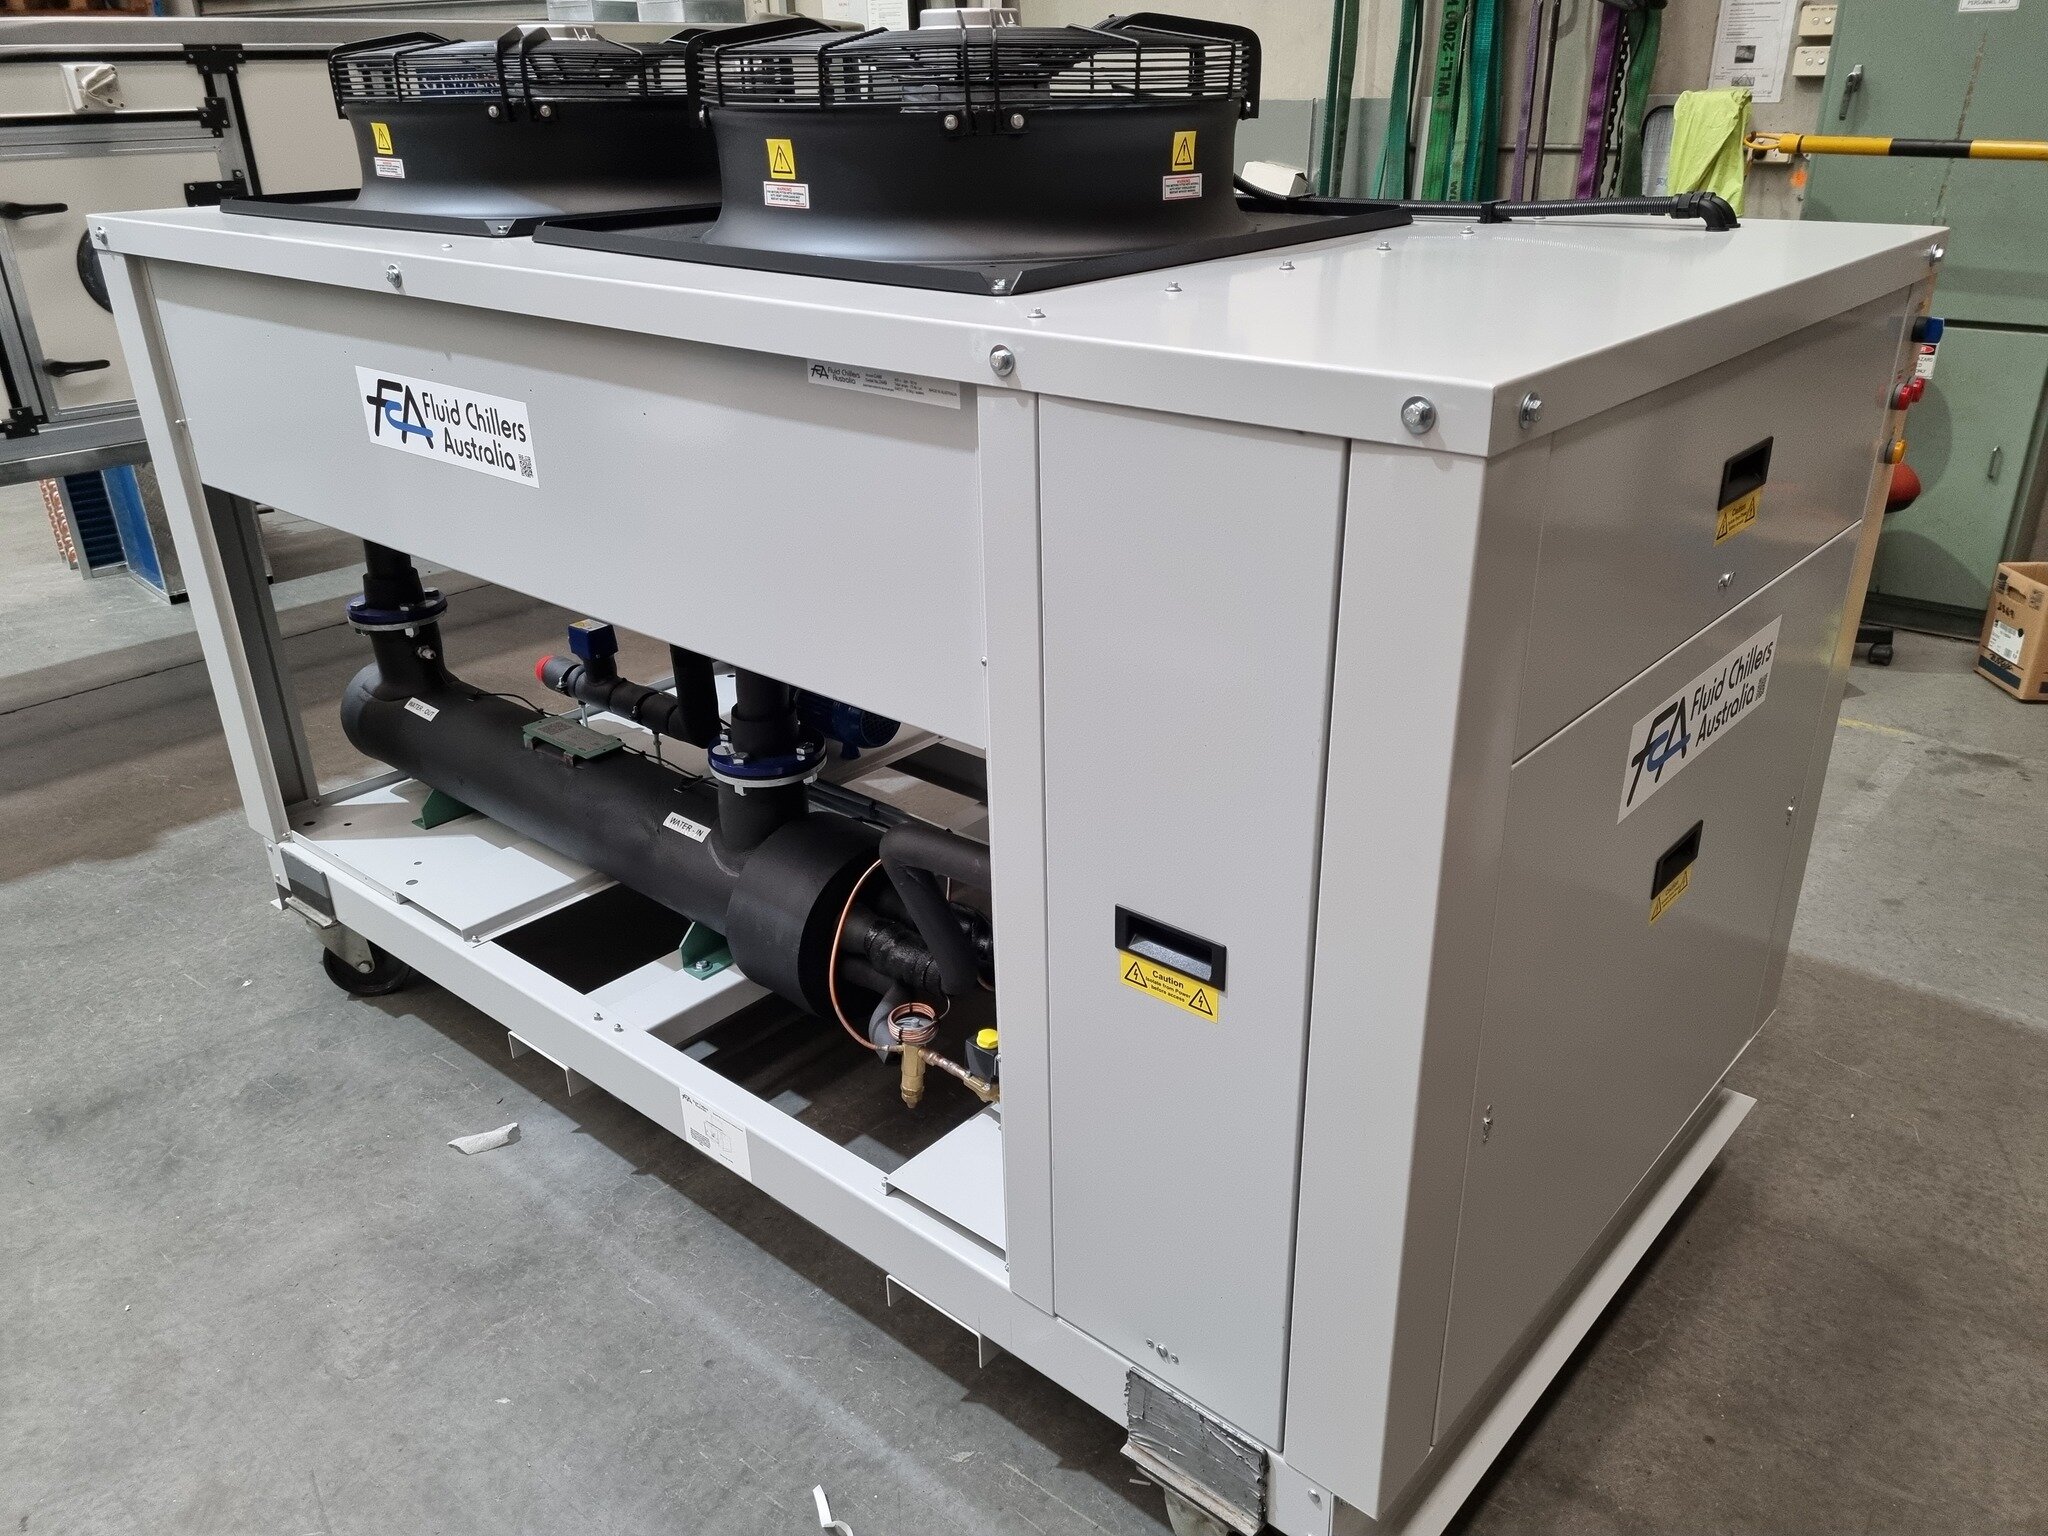 At Fluid Chillers Australia we keep chillers in stock. They are manufactured in Australia to suit Australia&rsquo;s harsh conditions.

Our CA66 &amp; CA96 models are currently available, with the following specifications:

-Down to -10&deg;C supply g